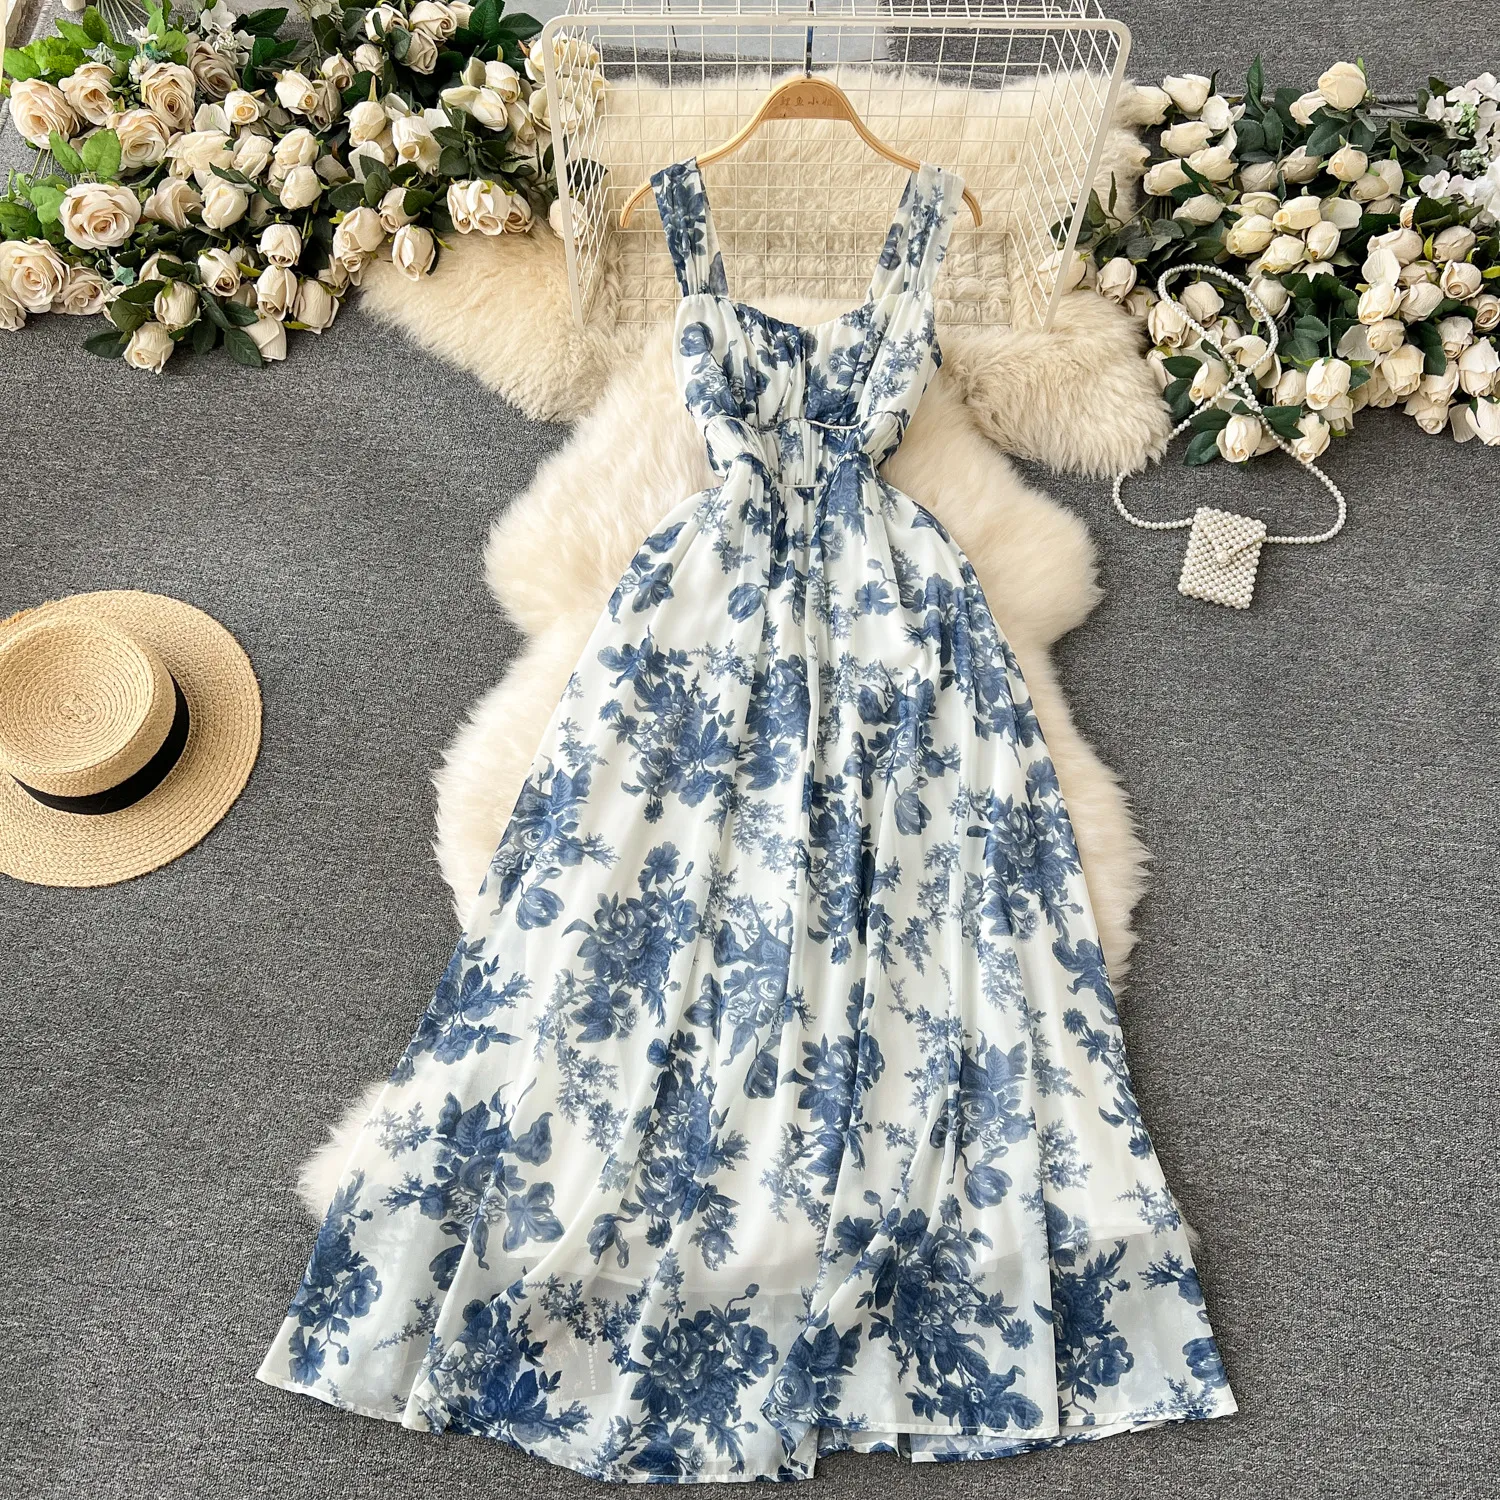 French retro floral holiday dress with elastic waistband for slimming effect, chiffon camisole dress with noble temperament dress